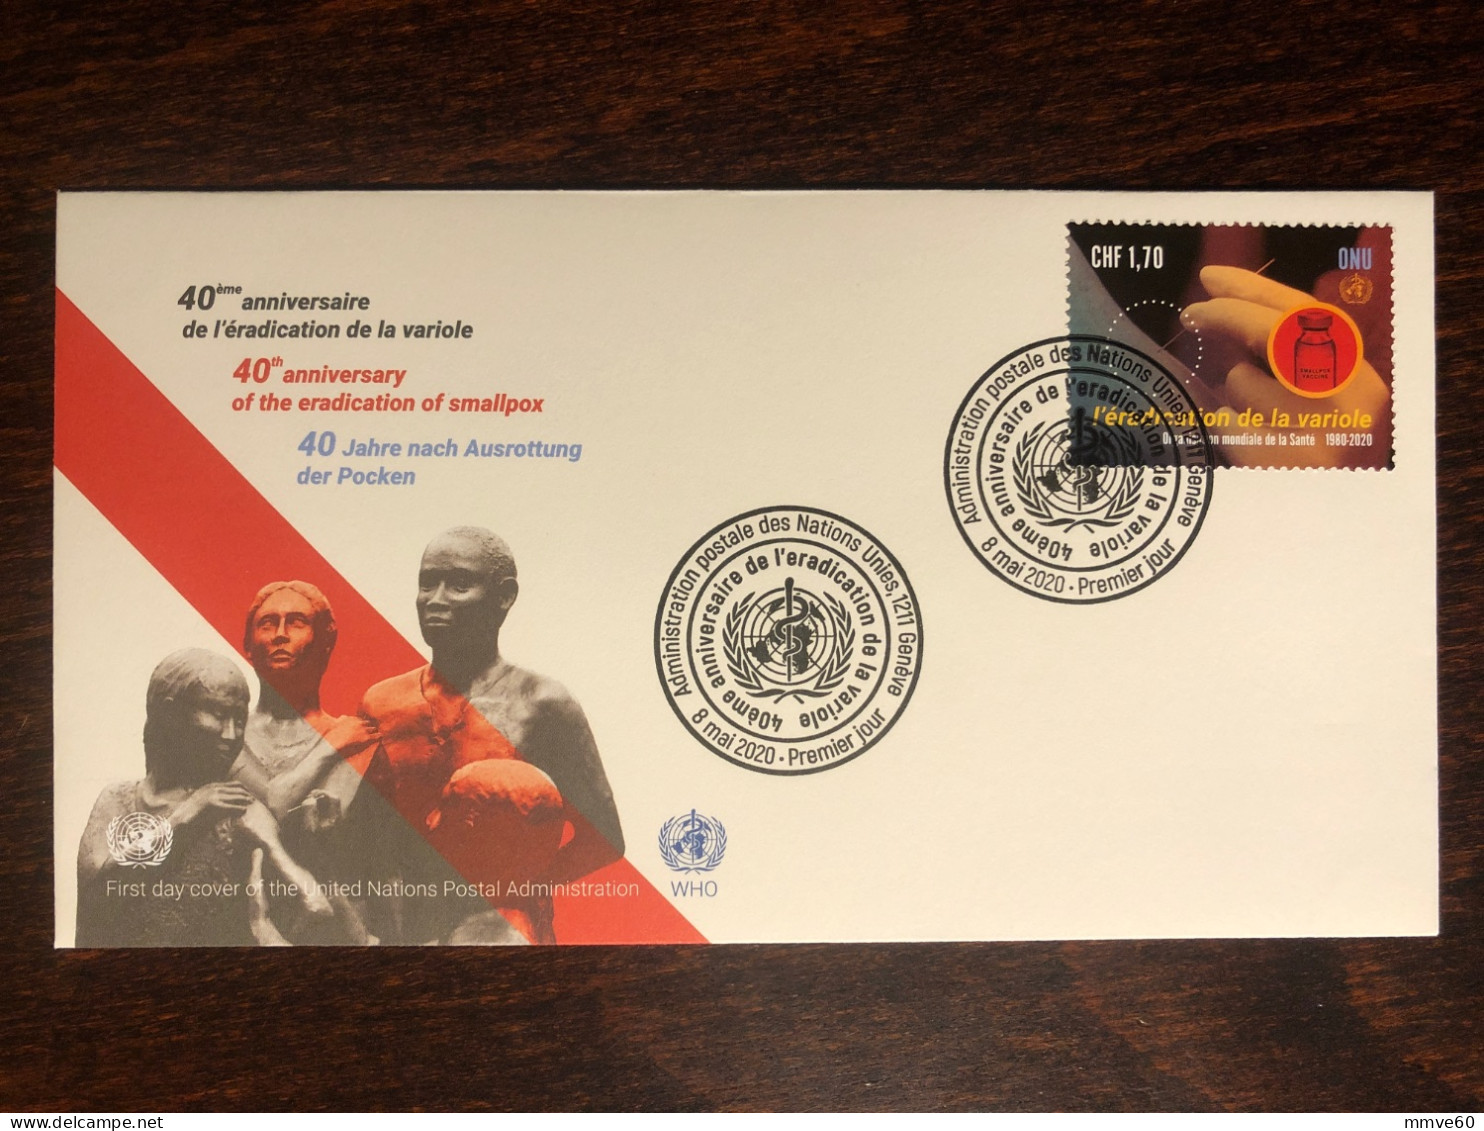 UNITED NATIONS UN UNO GENEVA FDC COVER 2020 YEAR SMALLPOX VARIOLE HEALTH MEDICINE STAMPS - New York/Geneva/Vienna Joint Issues